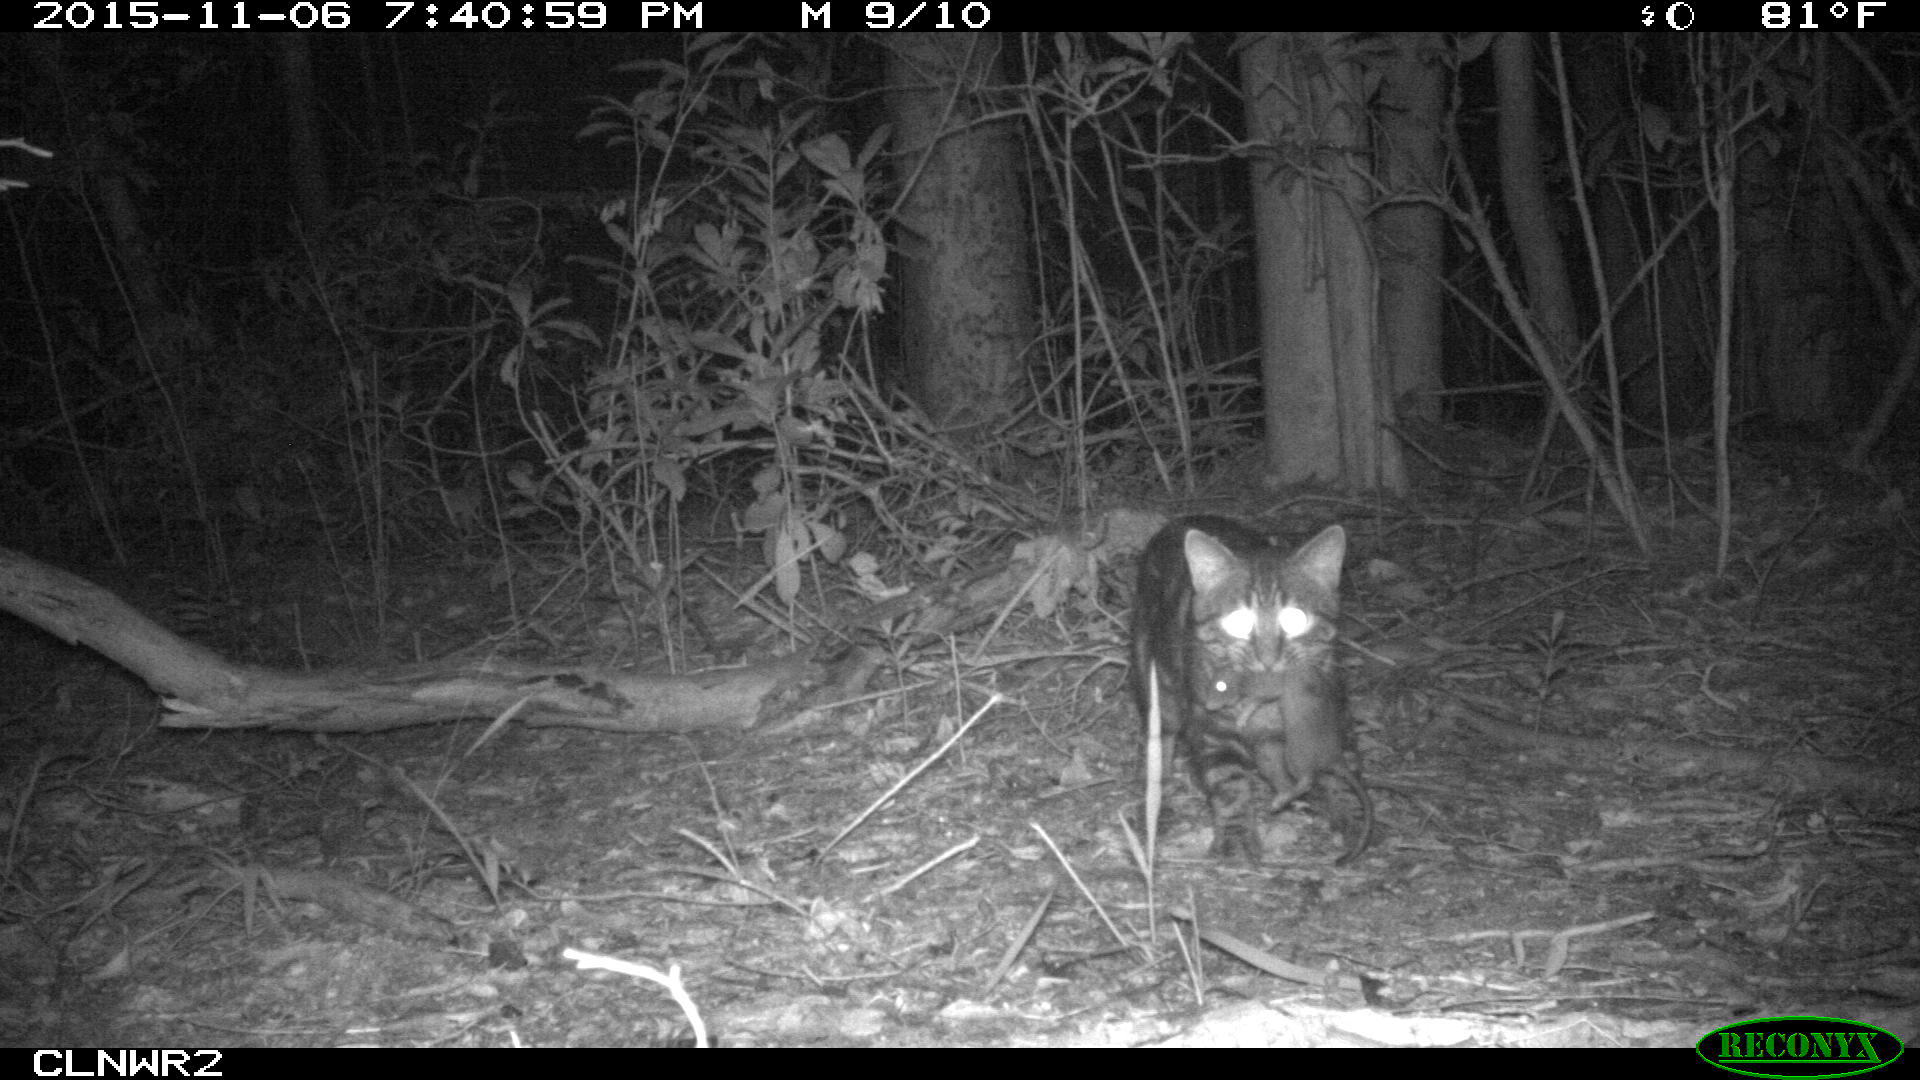 Motion-sensitive camera photo of a cat with what appears to be a Key Largo woodrat. Courtesy of Crocodile Lake National Wildlife Refuge